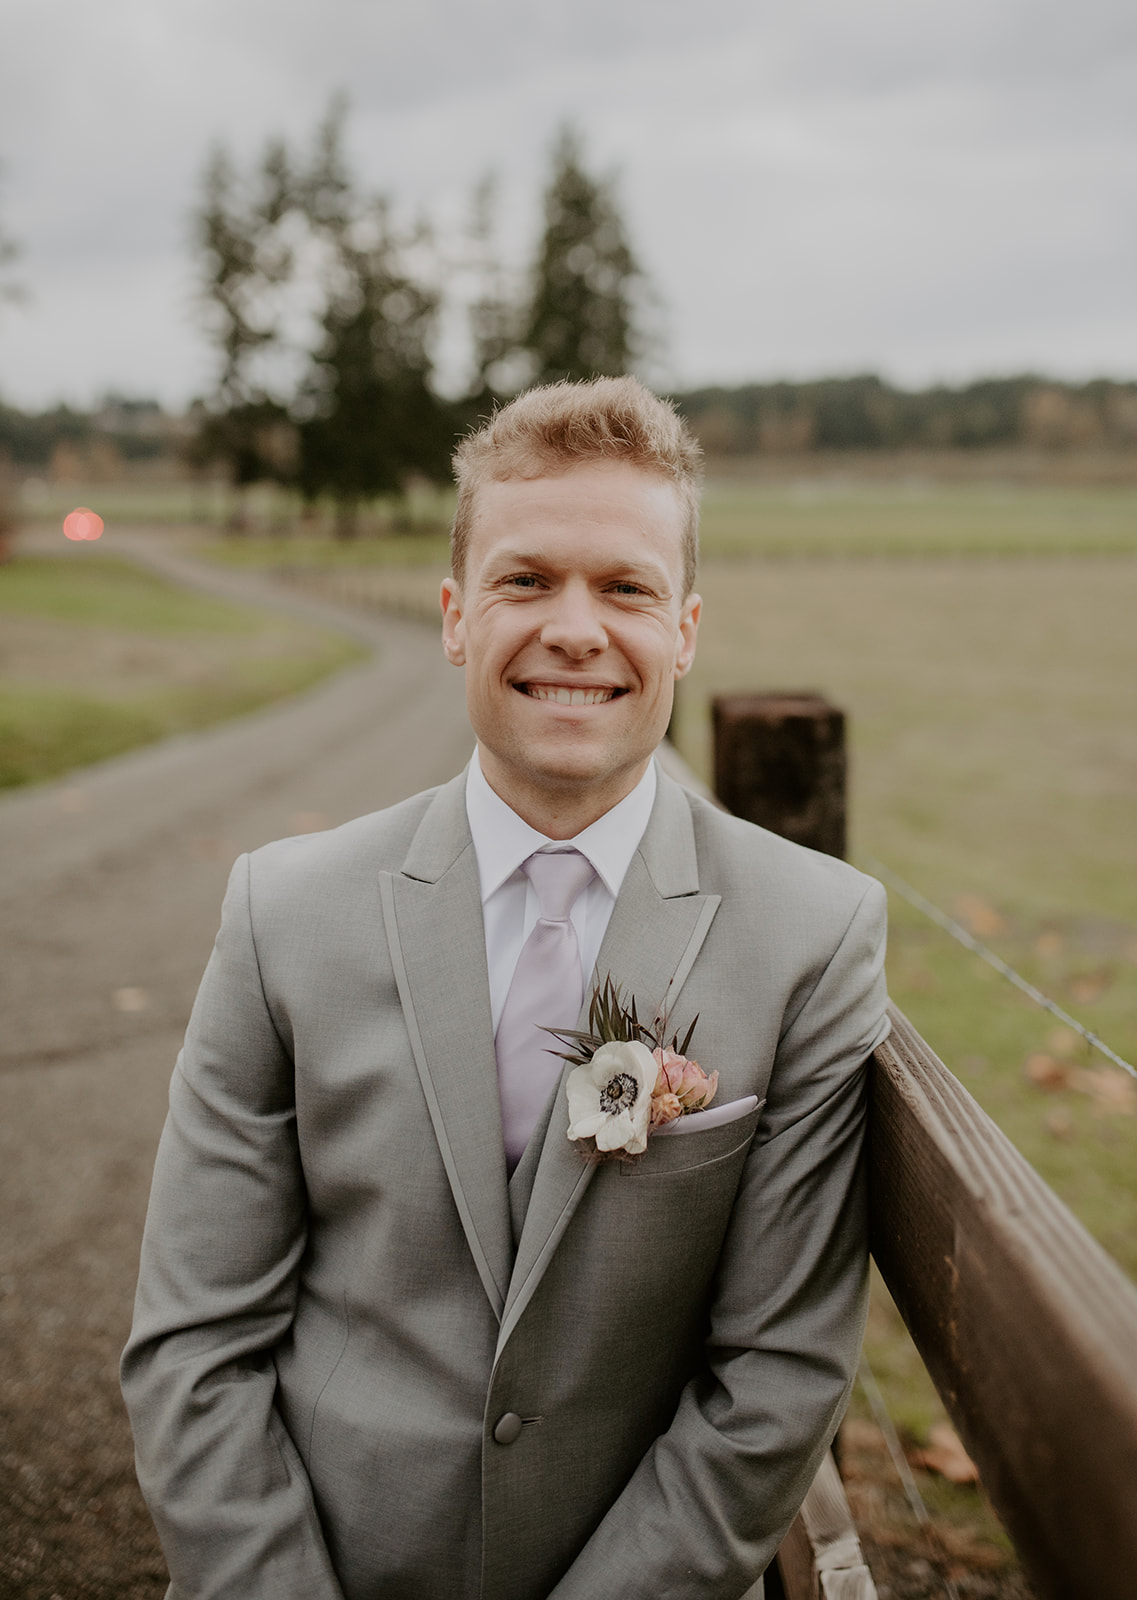 The groom with his boutonniere